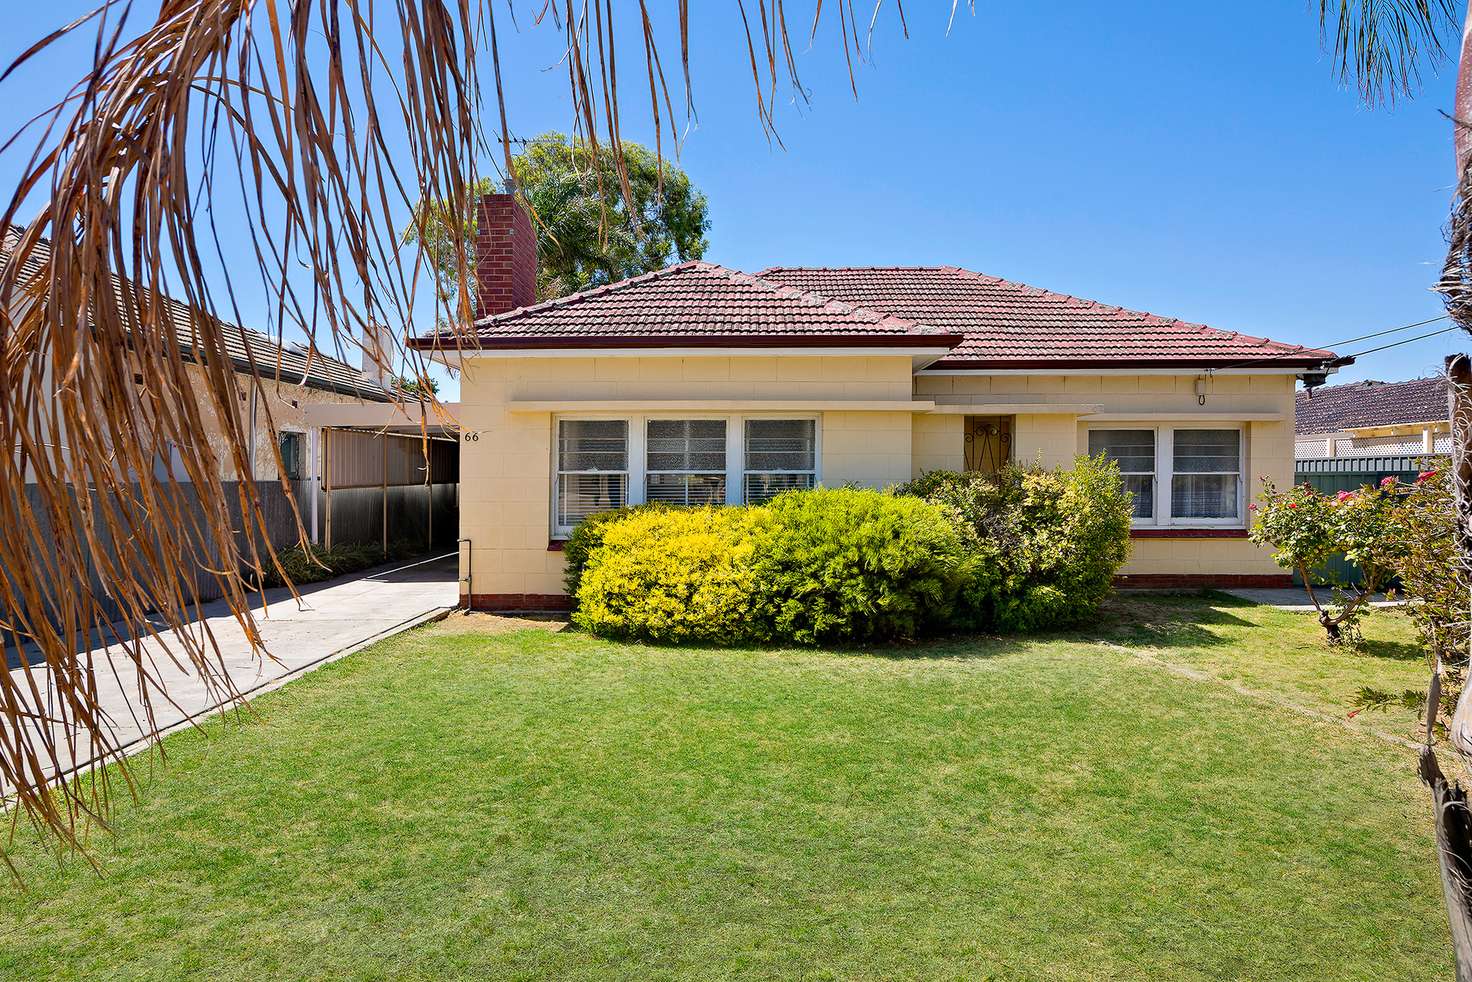 Main view of Homely house listing, 66 Cliff Street, Glenelg East SA 5045